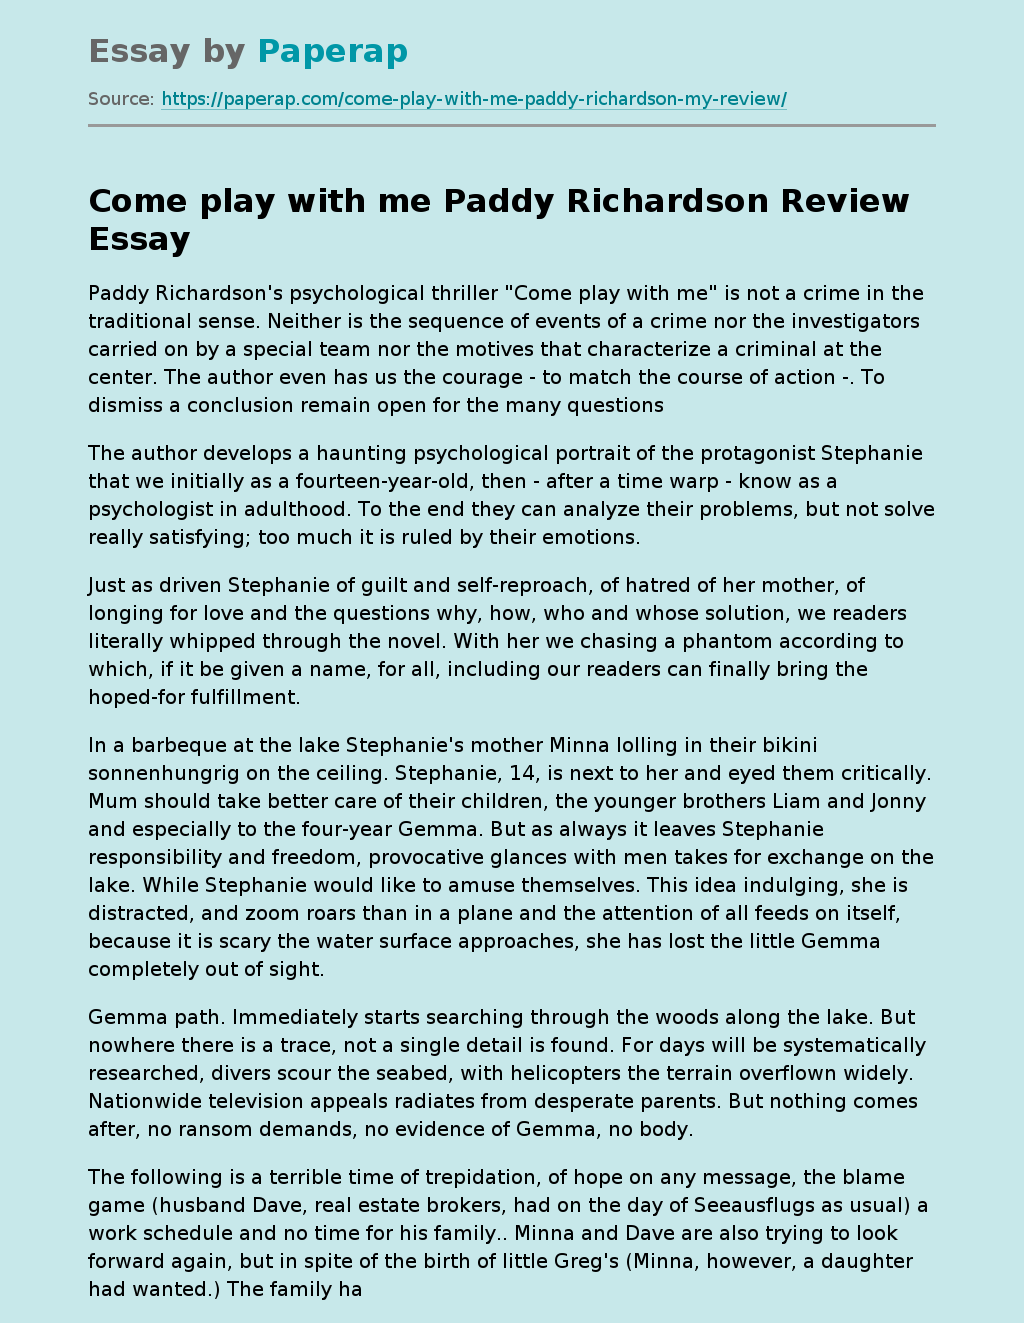 Come play with me Paddy Richardson Review